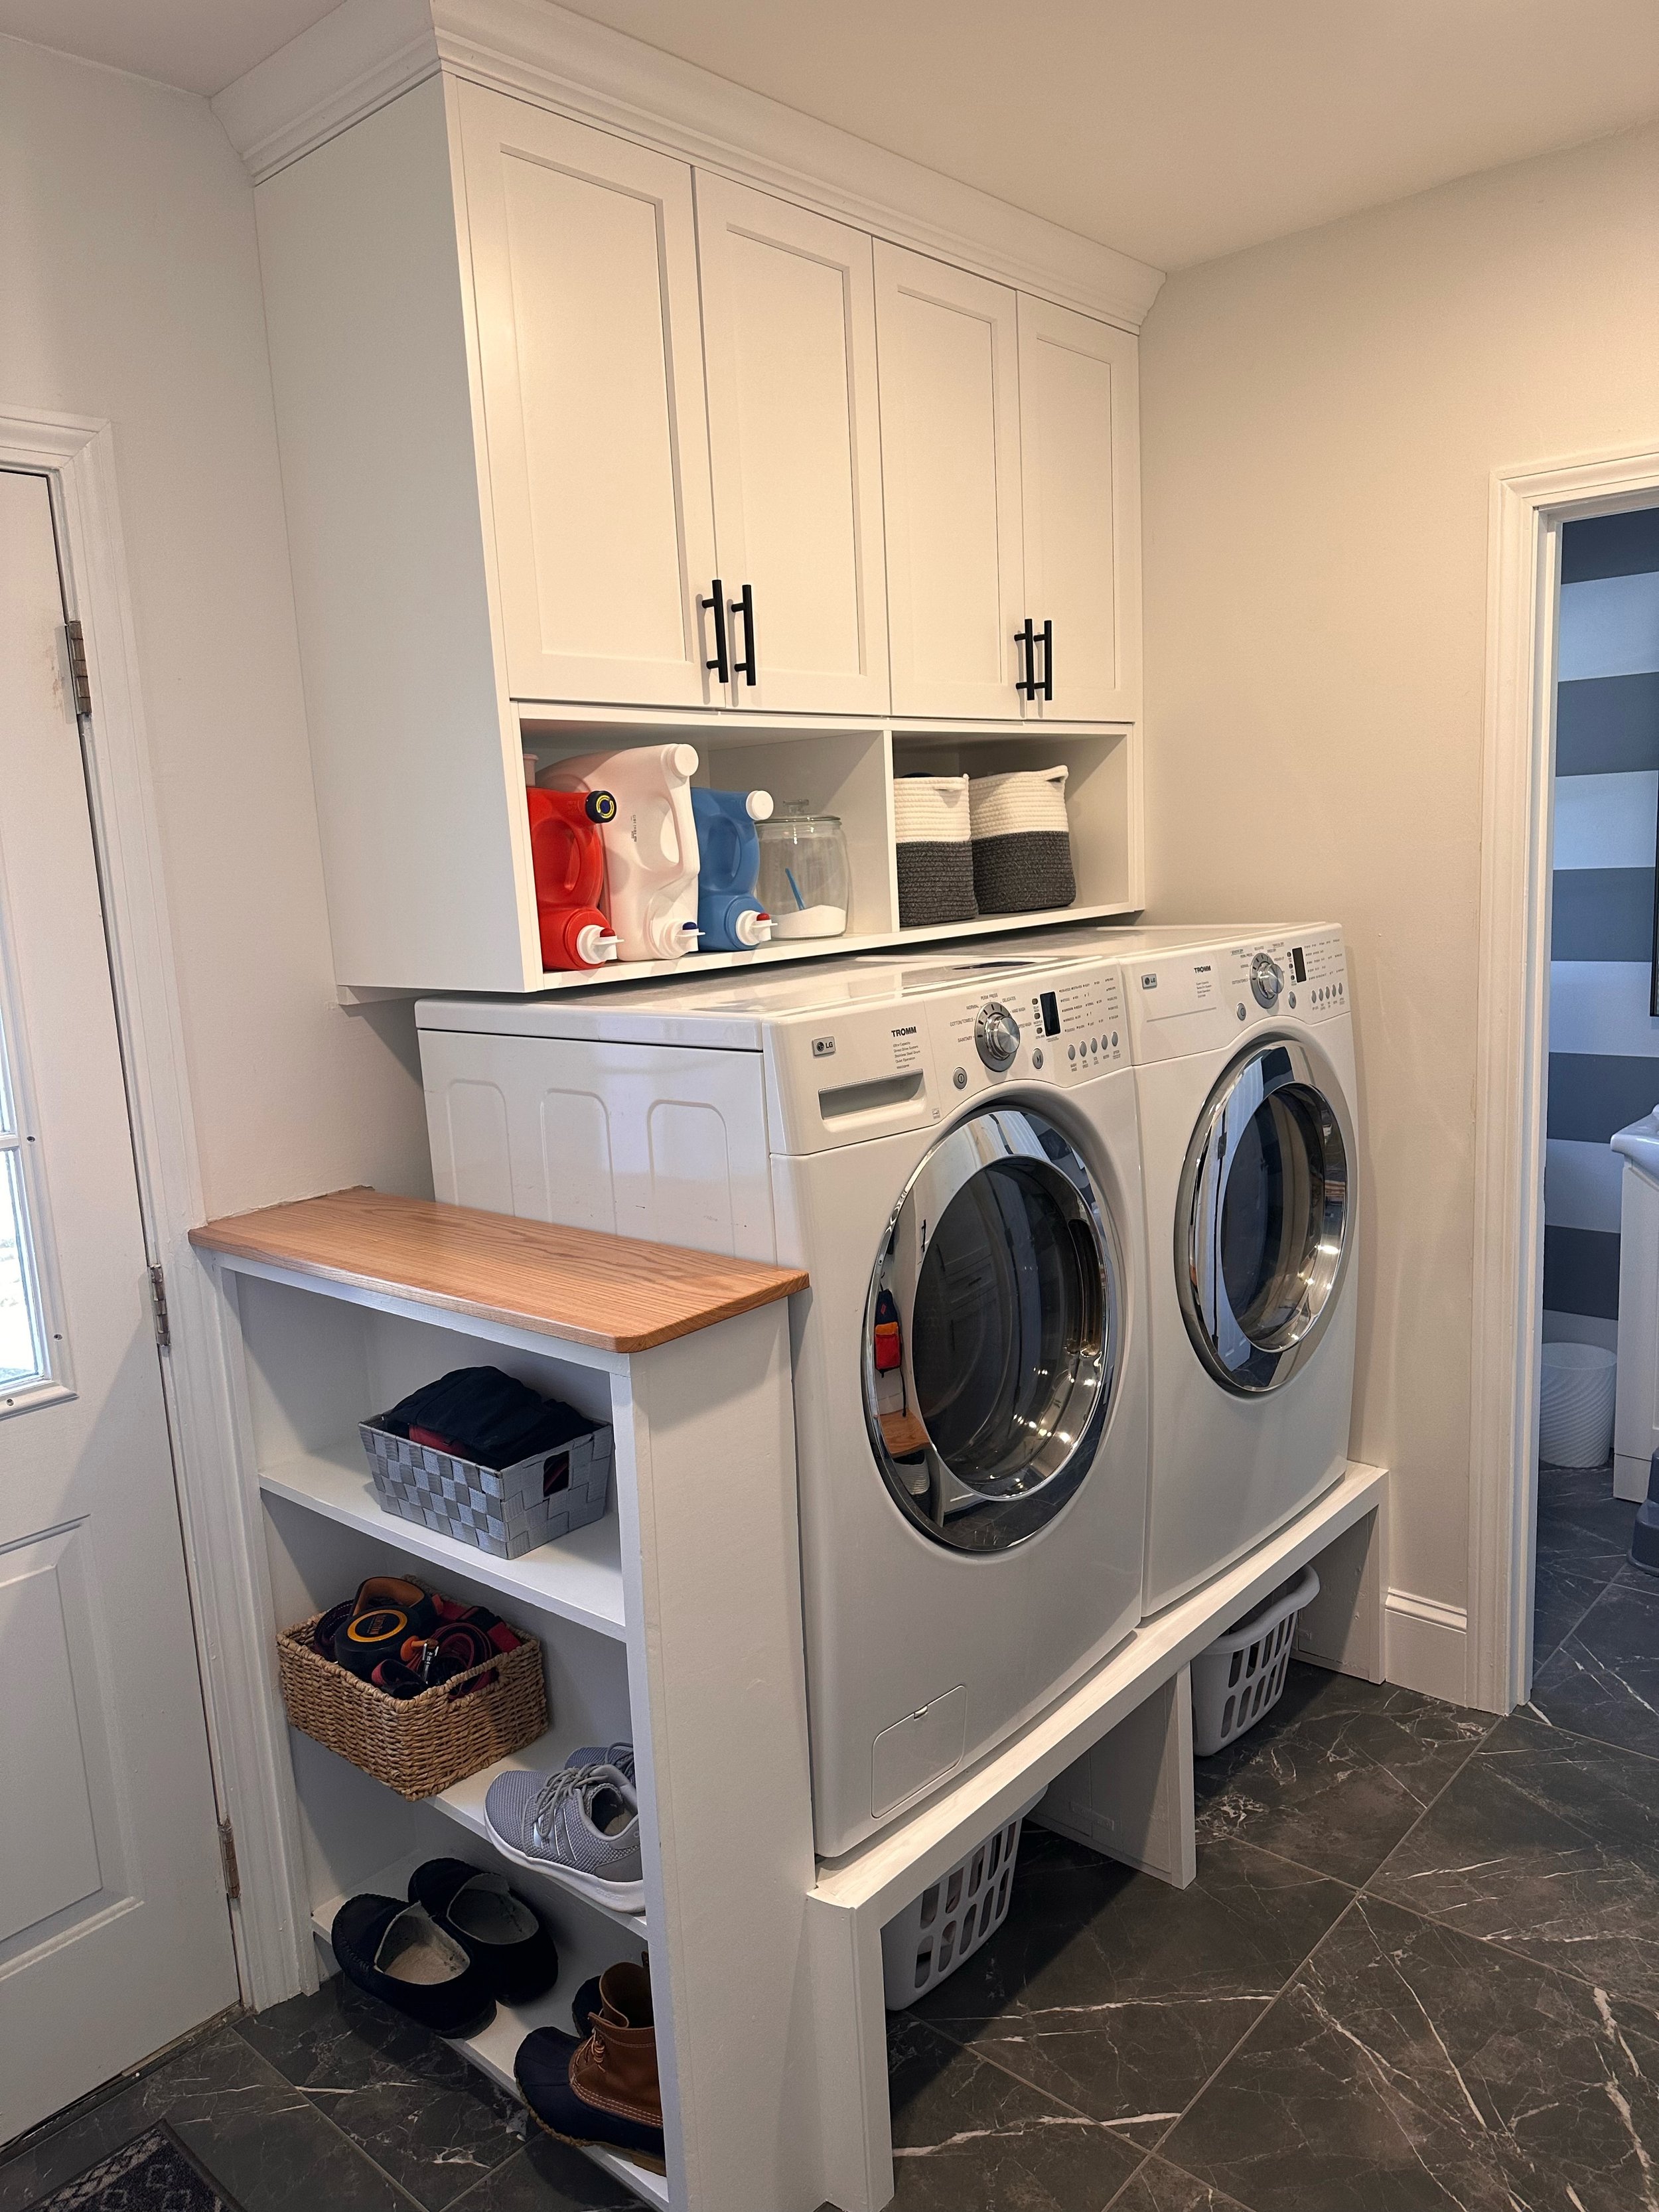 LAUNDRY ROOMS